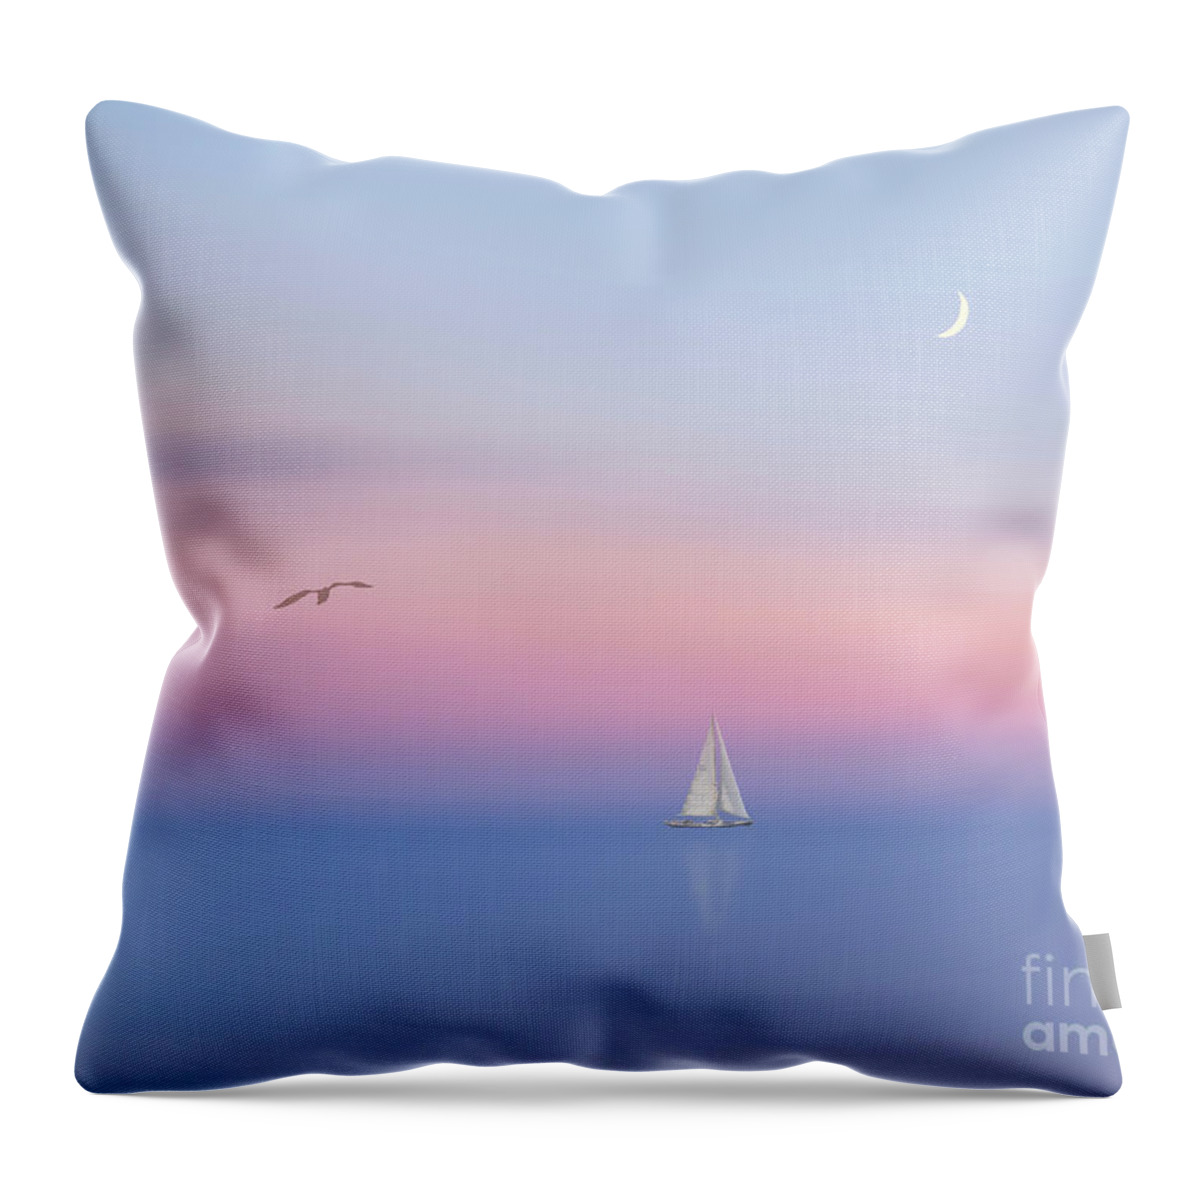 Sail Sunset Soft Gentle Calmness Serenity Relaxation Restful Triangles Moon Bird Landscape Scenery Seascape Ship Boat Beautiful Delicate Touching Emotional Impressionism Impression Alone Lonely Loneliness Solitude Delightful Romantic Fairy Poetic Magical Still Spiritual Nostalgic Inspirational Uplifting Blue Pink White Minimal Minimalist Minimalism Sailing Three Ocean Relax Sweet Dreamy Dream Timeless Foggy Misty Pleasing Appealing Painterly Artistic Watercolor Pastel Fantasy Peaceful Dawn Dusk Throw Pillow featuring the photograph Serenity by Tatiana Bogracheva